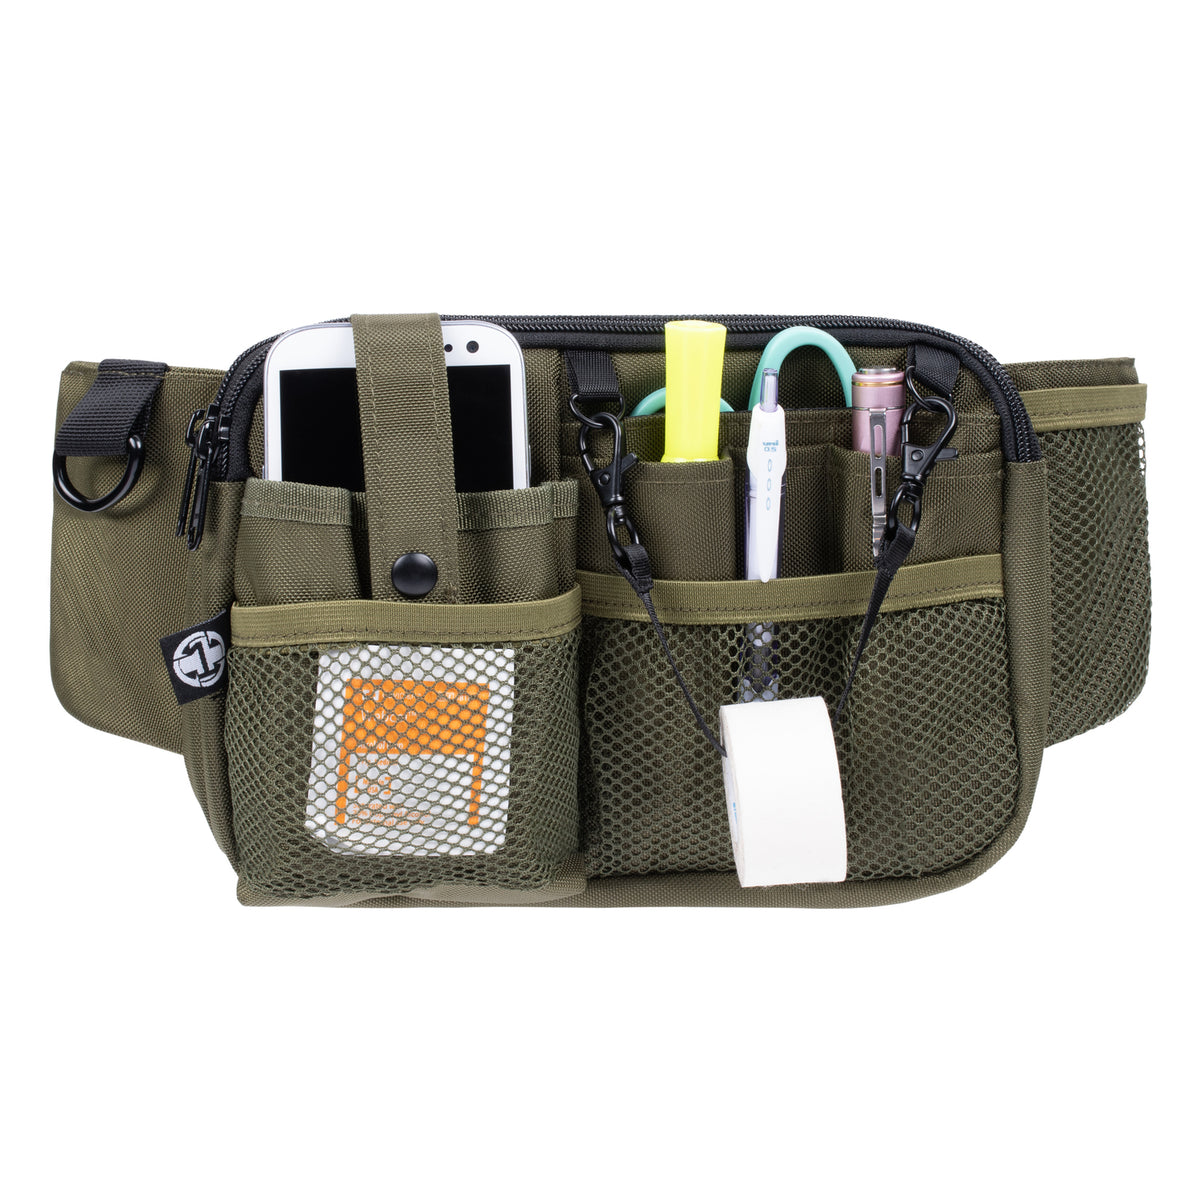 Nurse Fanny Pack with Multi-Compartment and Tape Holder